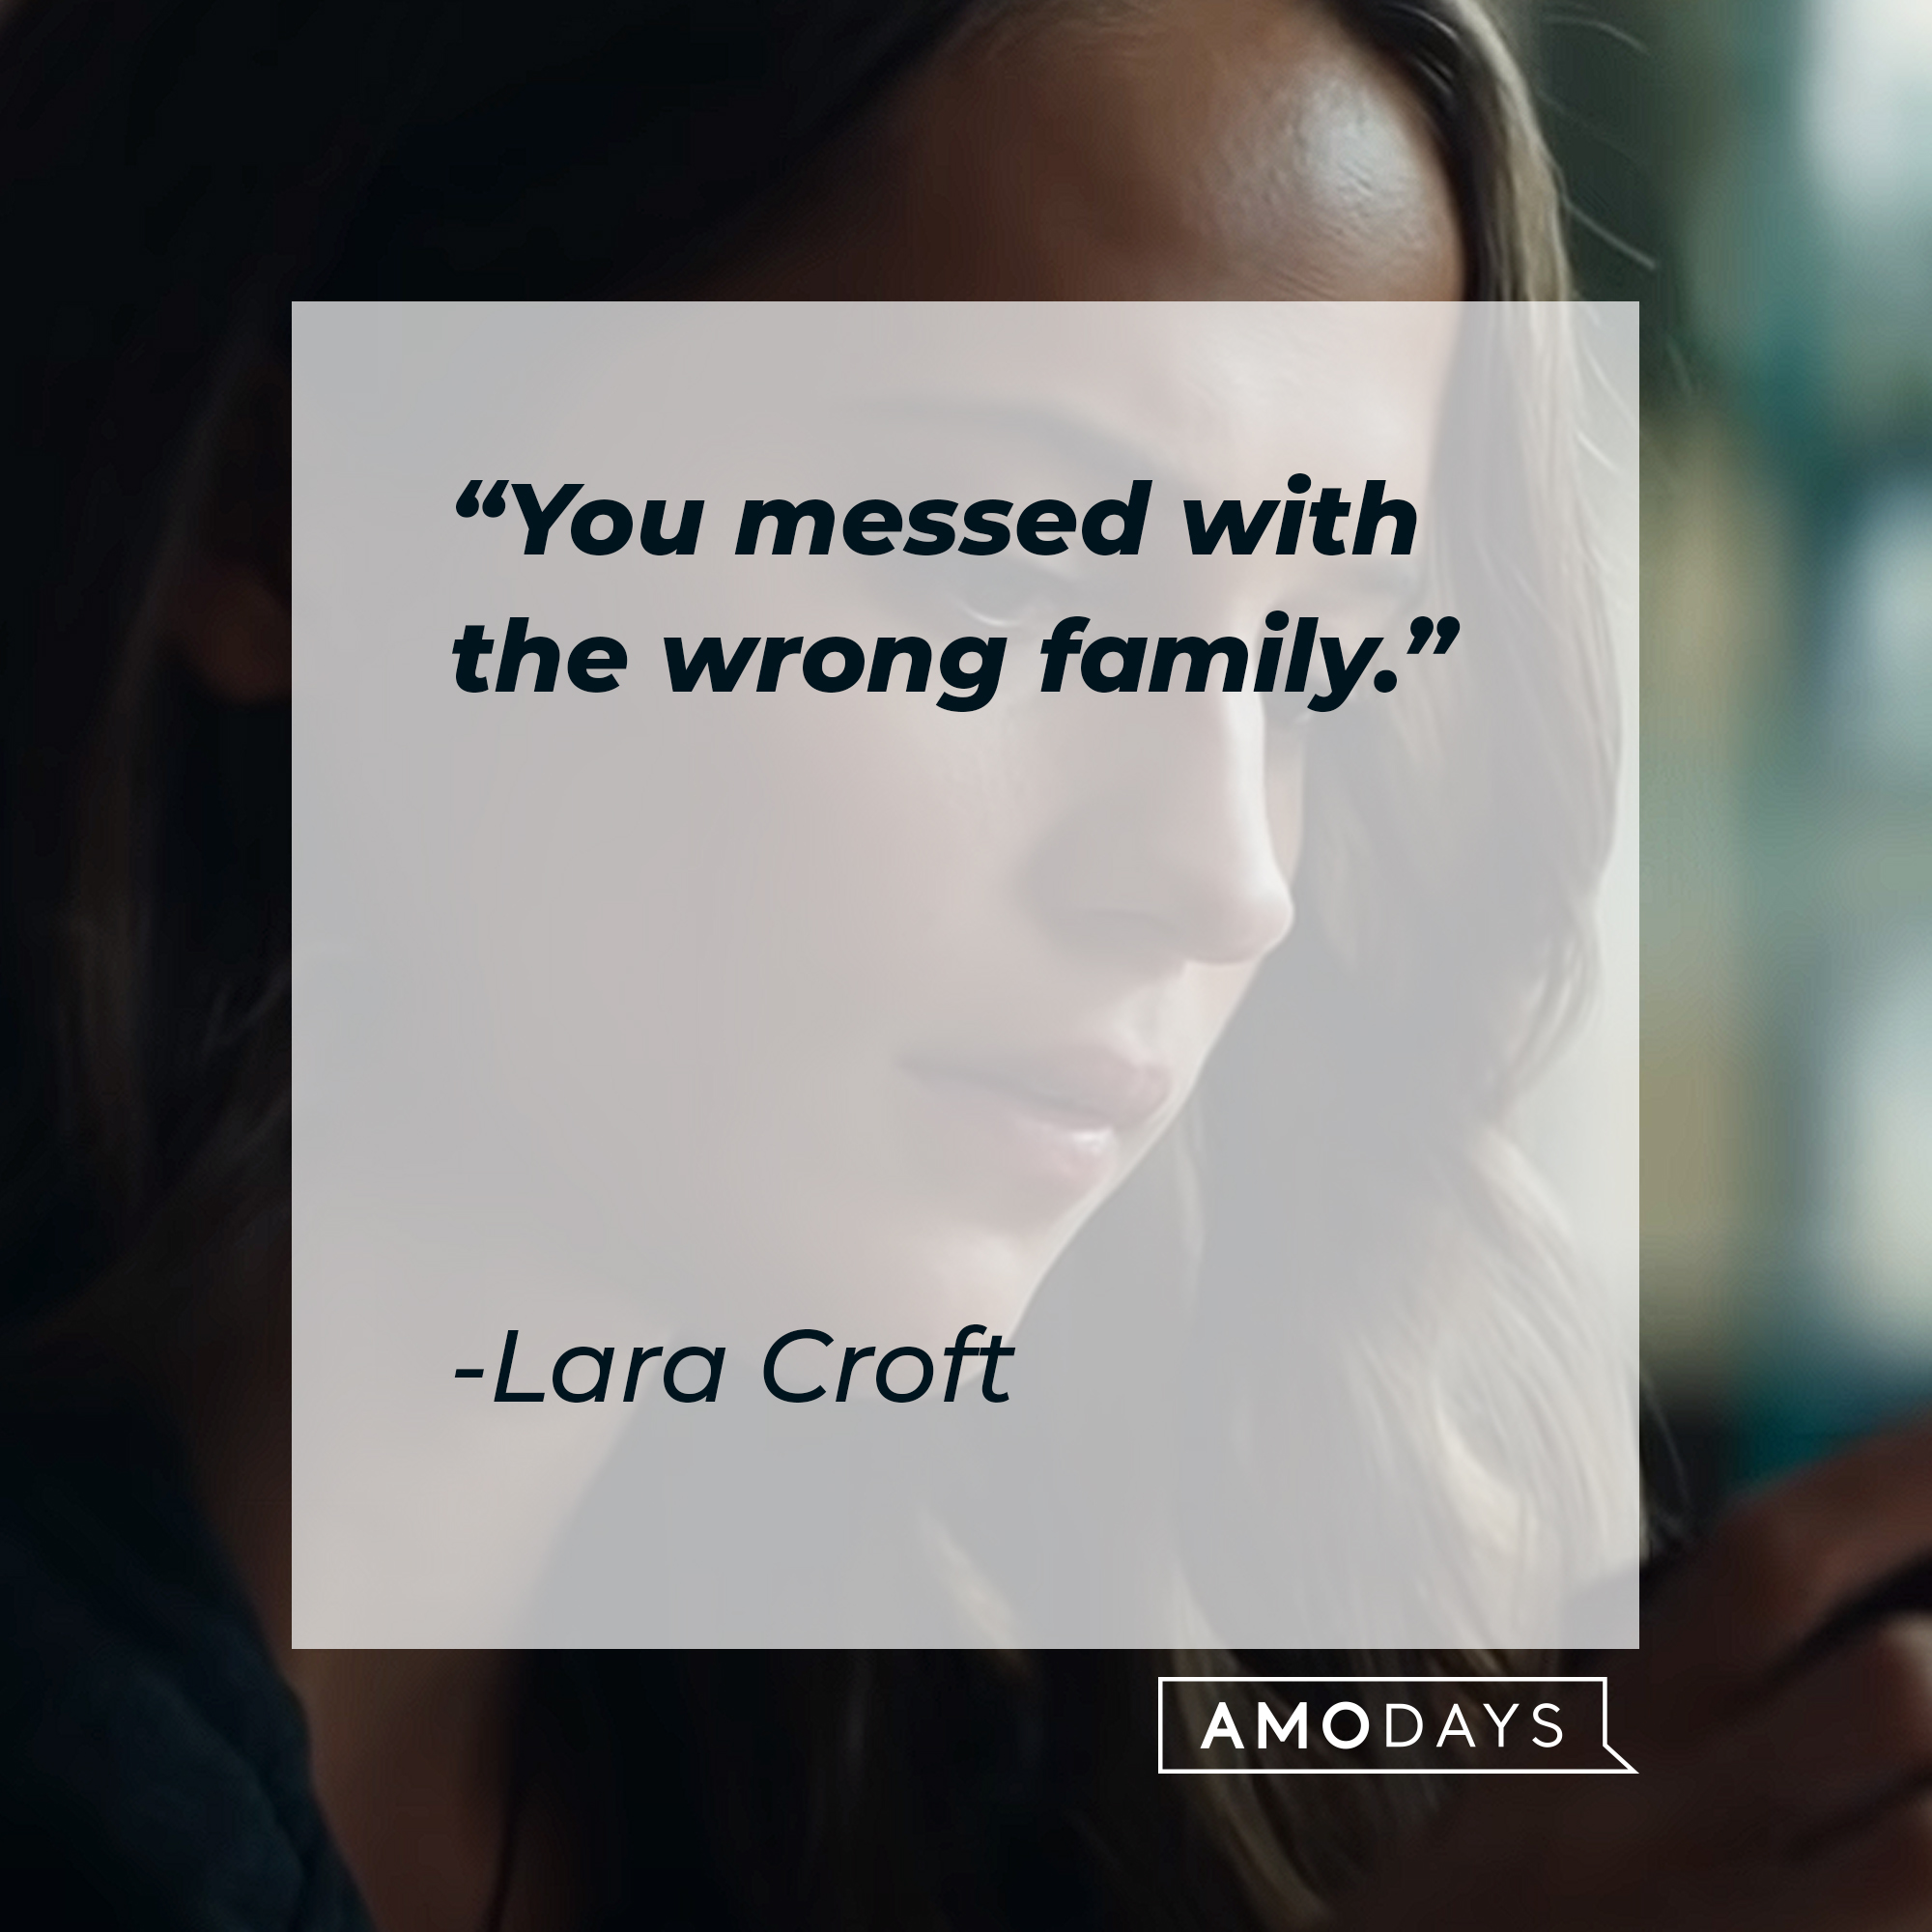 An image of Alicia Vikander’s Lara Croft with her quote: “You messed with the wrong family.” | Source: youtube.com/WarnerBrosPictures